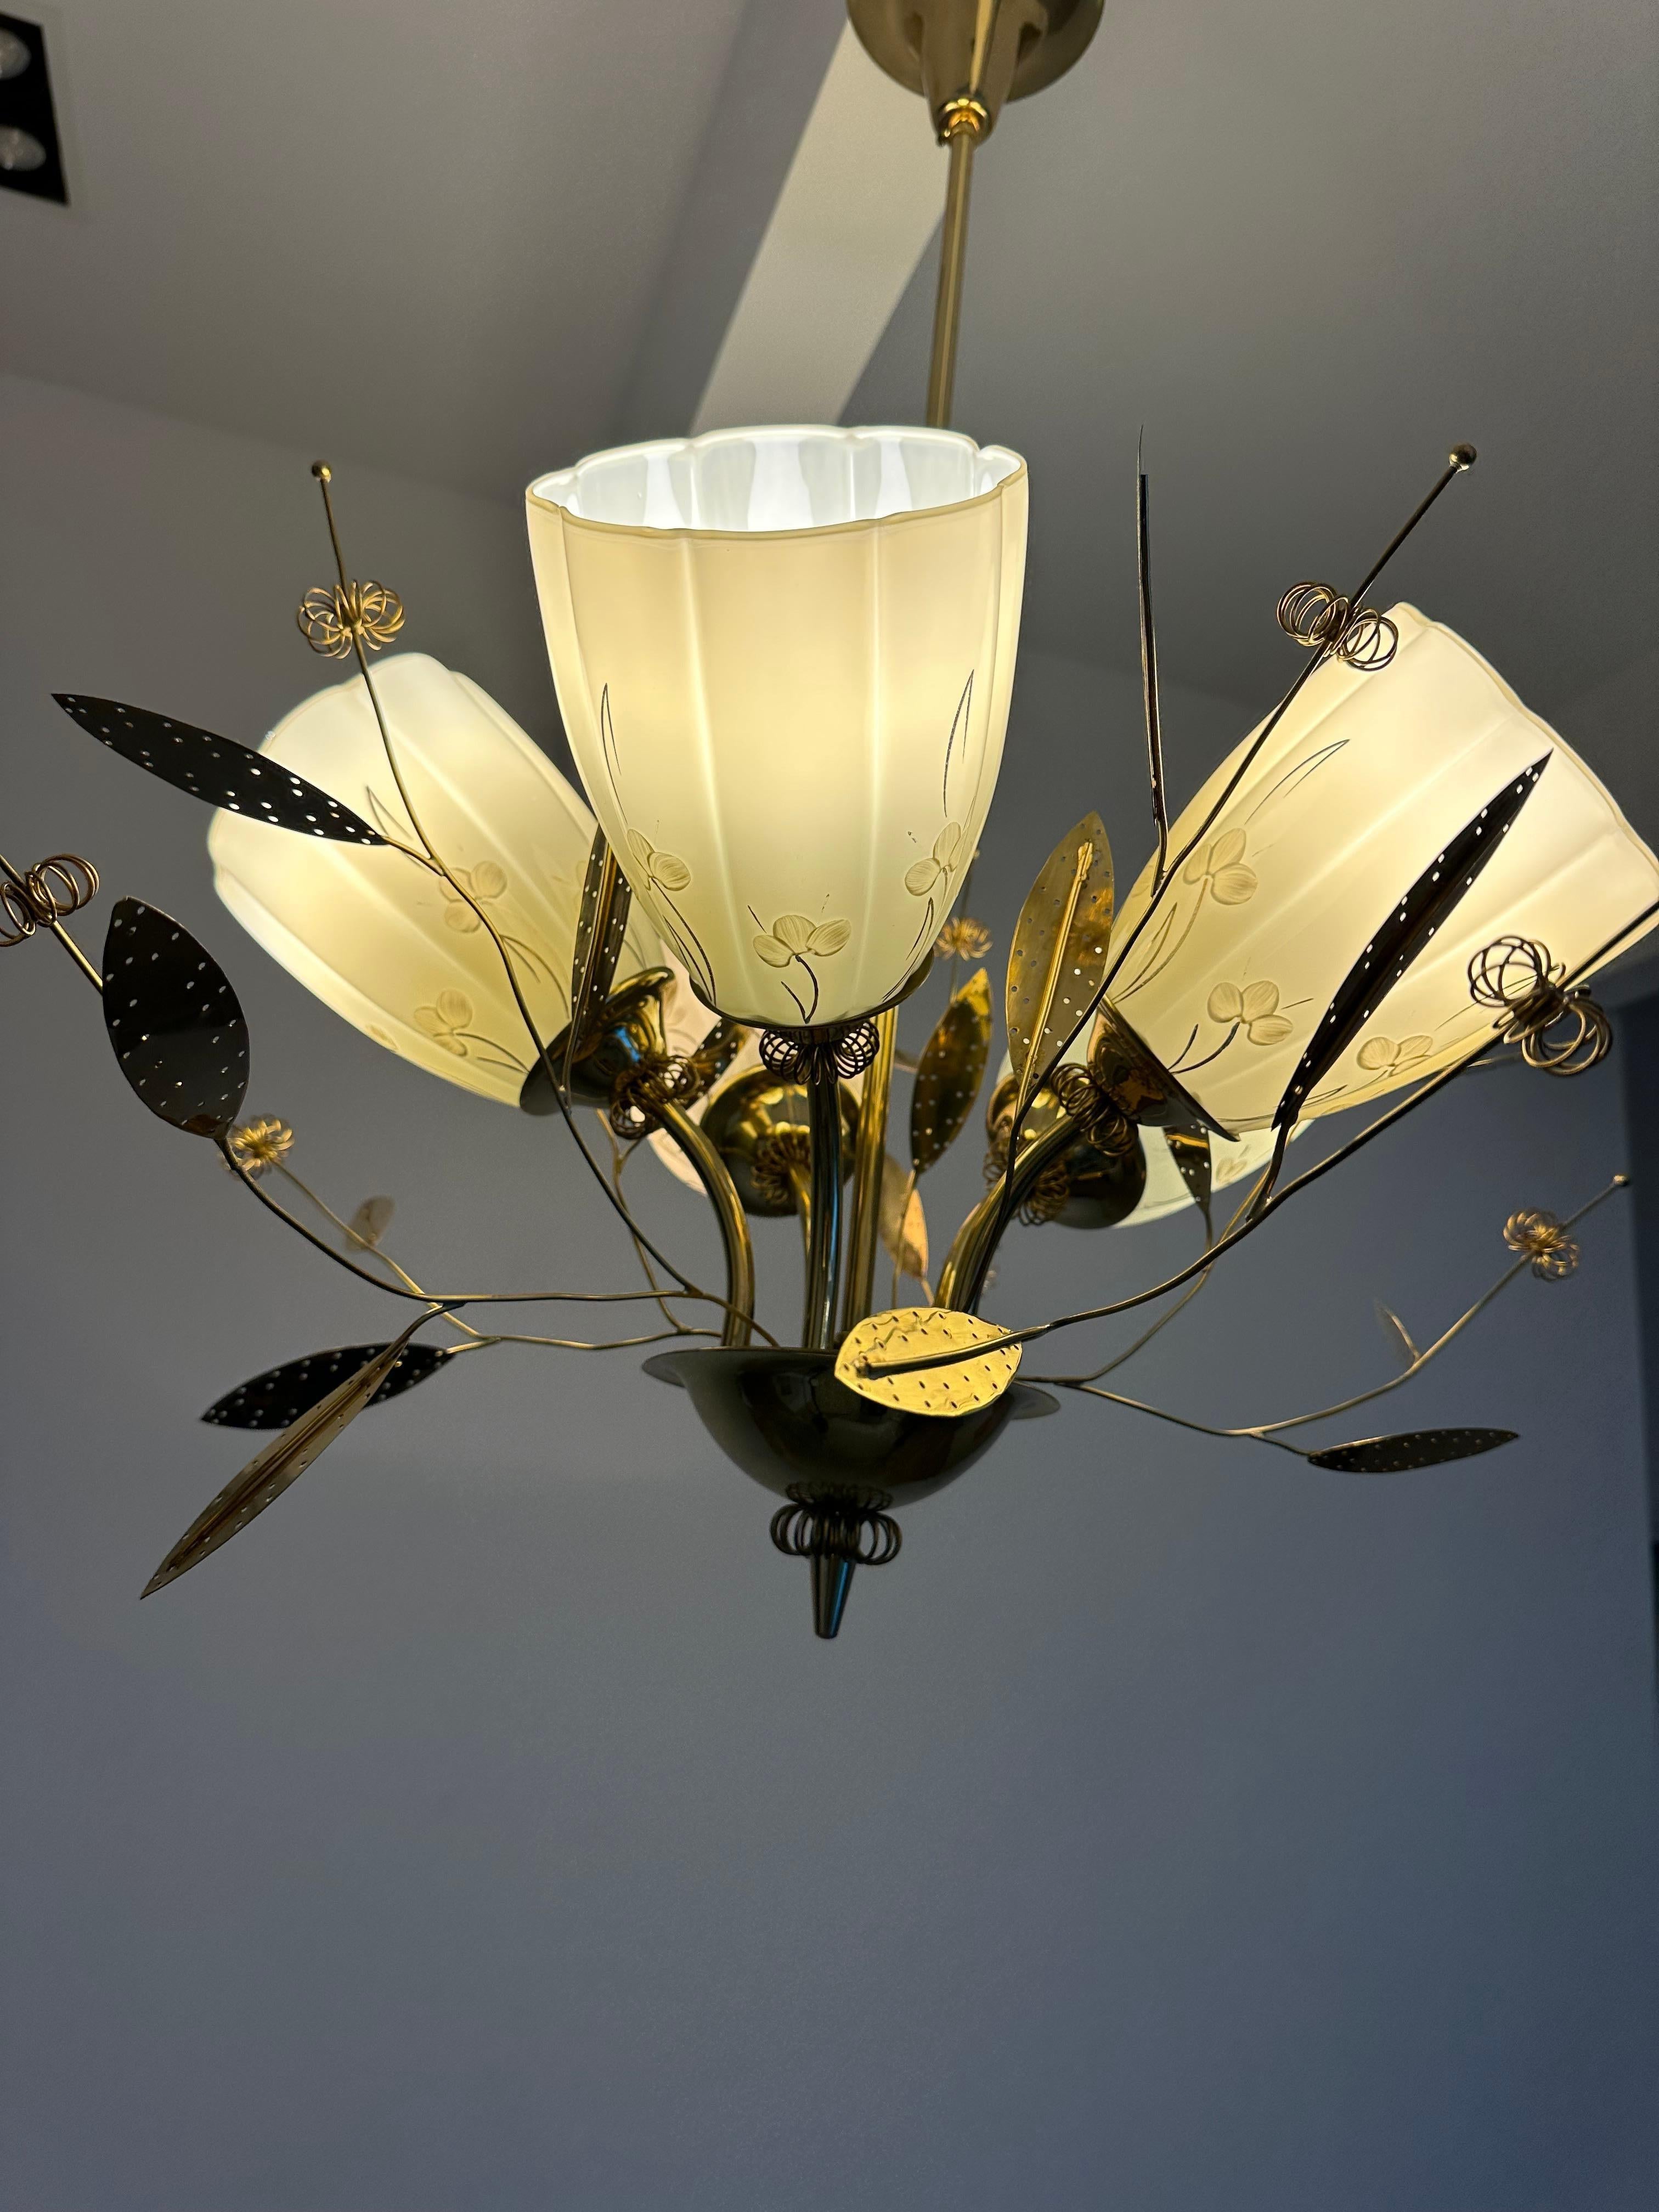 Beautiful Chandelier / Pendant Ceiling Light by Itsu, Finland, 1950s For Sale 3